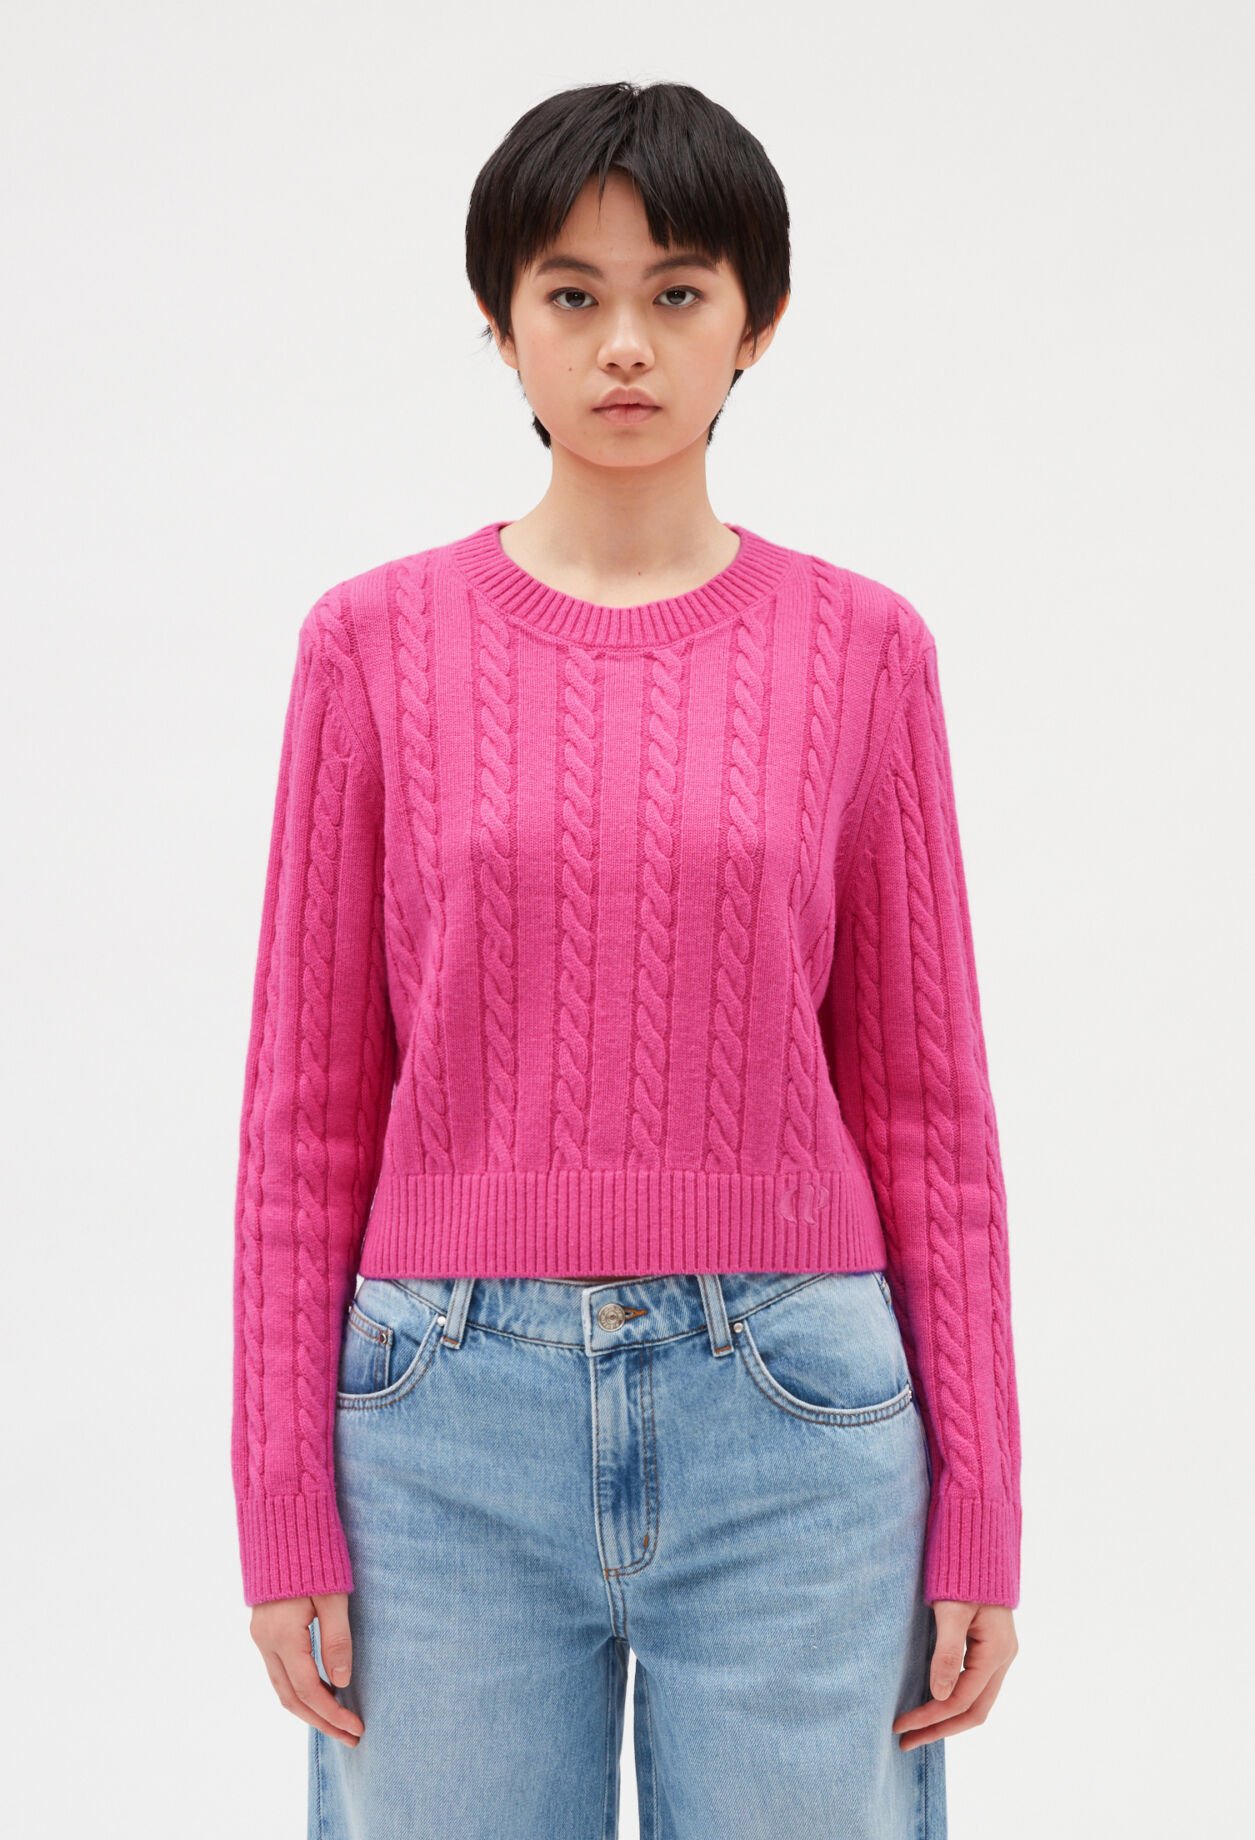 Cable knit cropped jumper